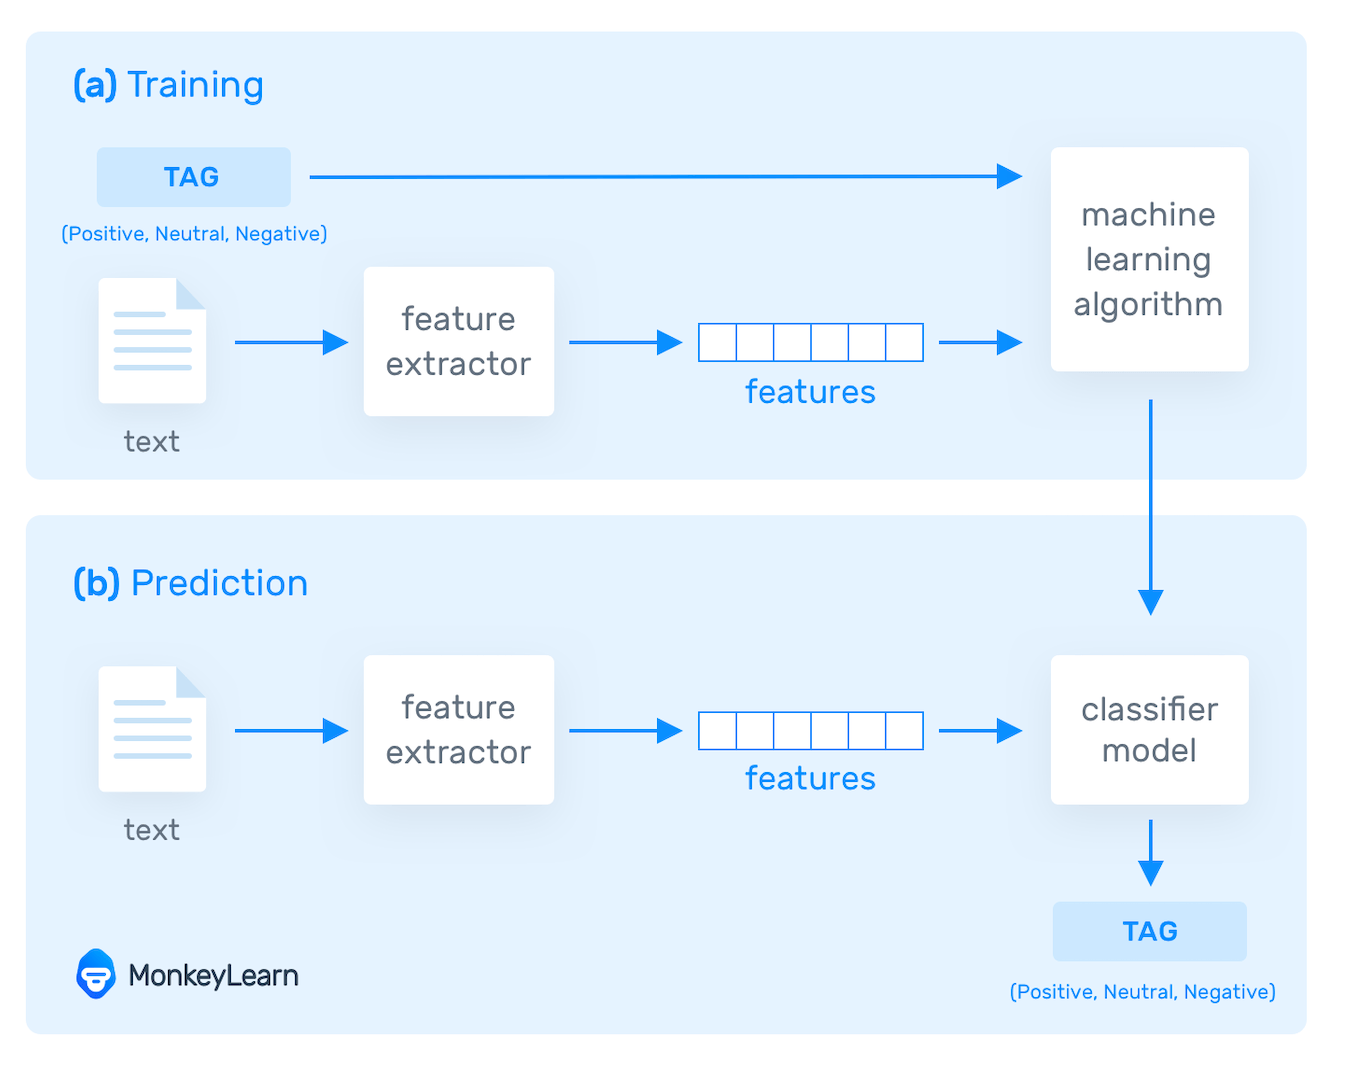 A diagram showing how training a machine learning text analysis model works.